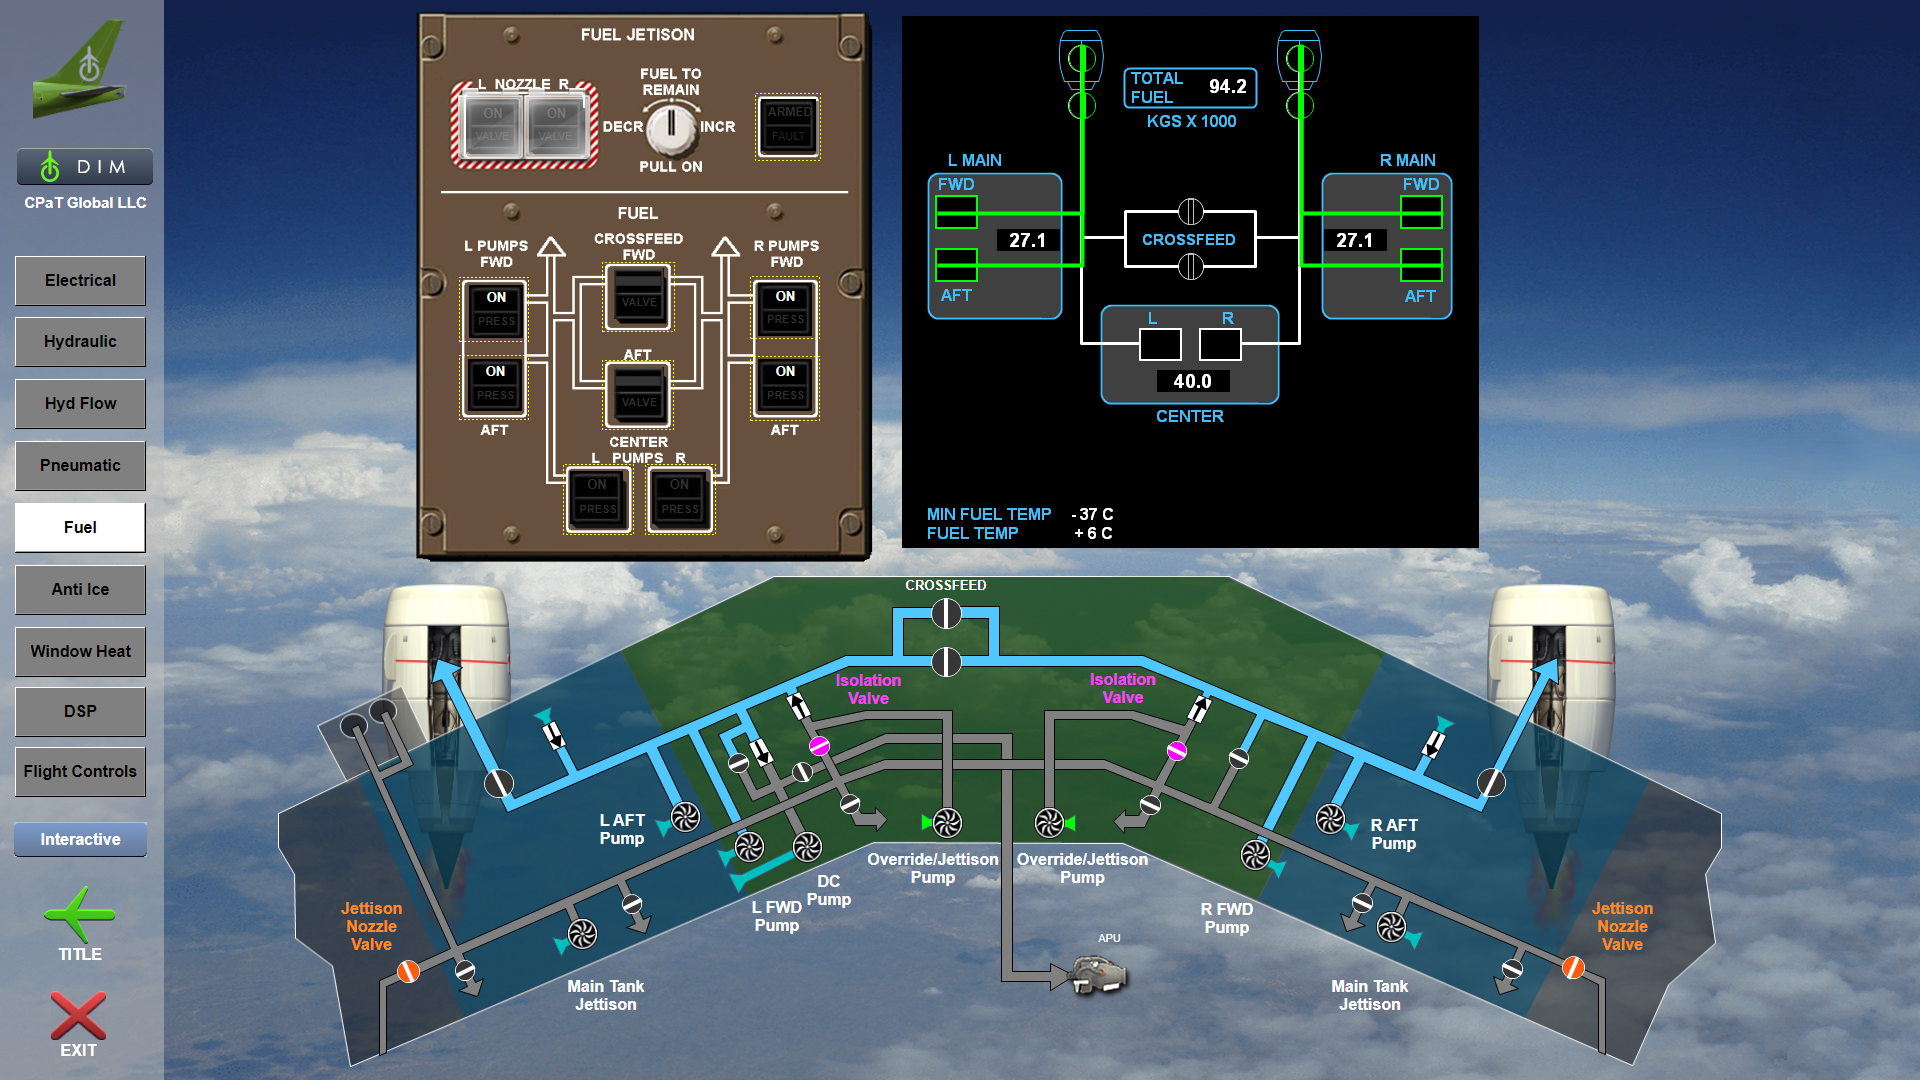 Boeing 777 Interactive Aircraft Systems Diagram Cpat Global